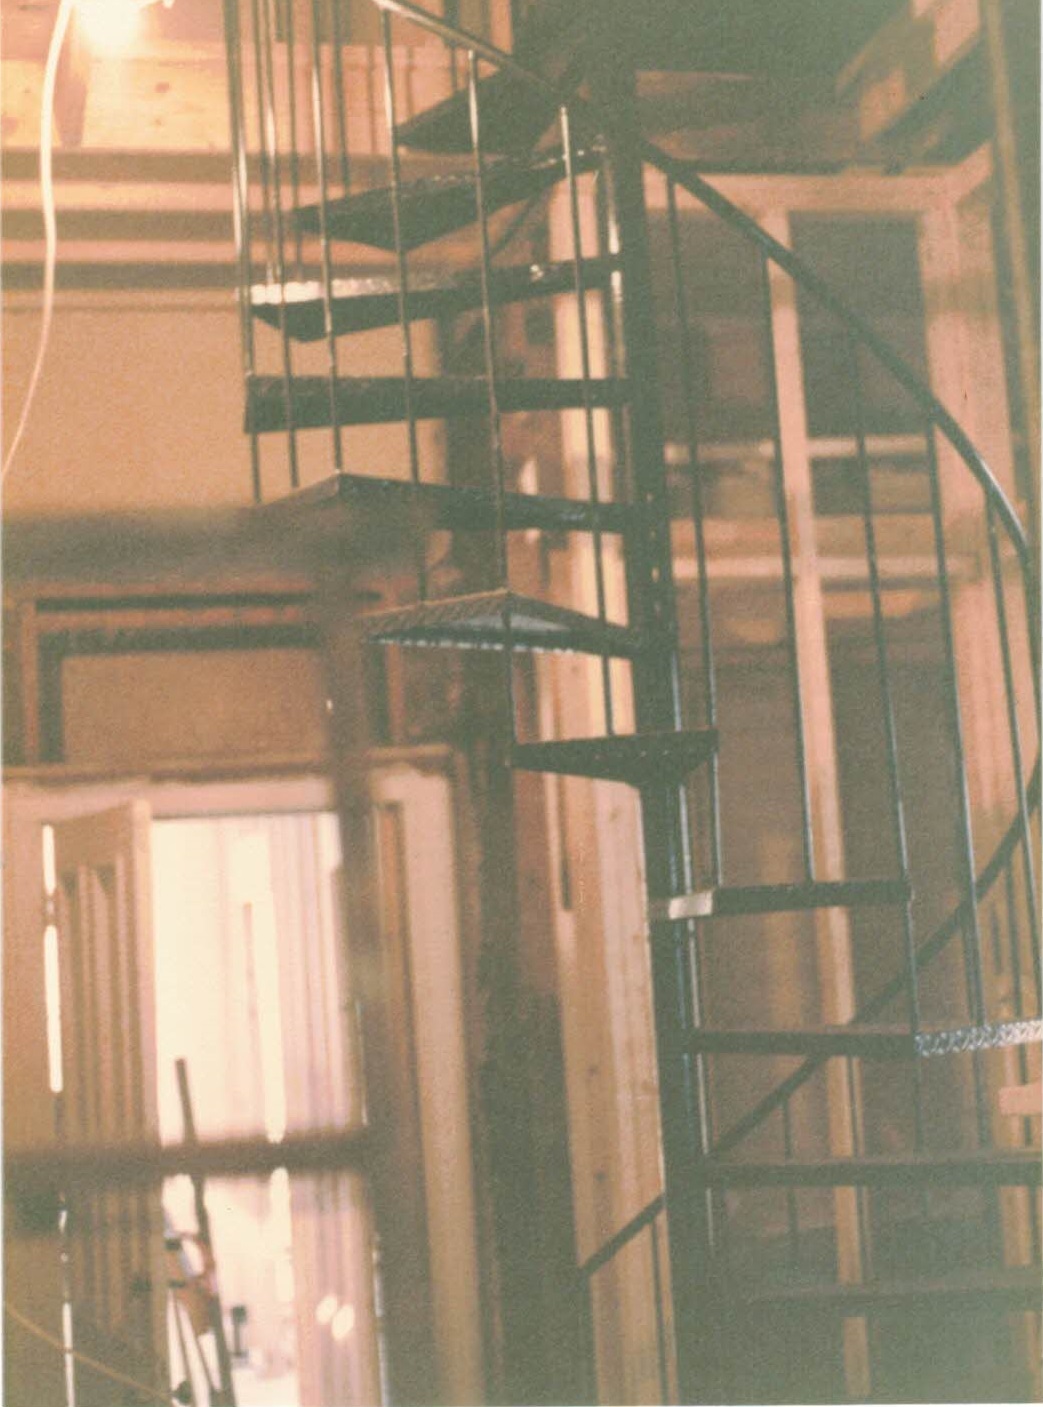 Spiral staircase to 3rd story